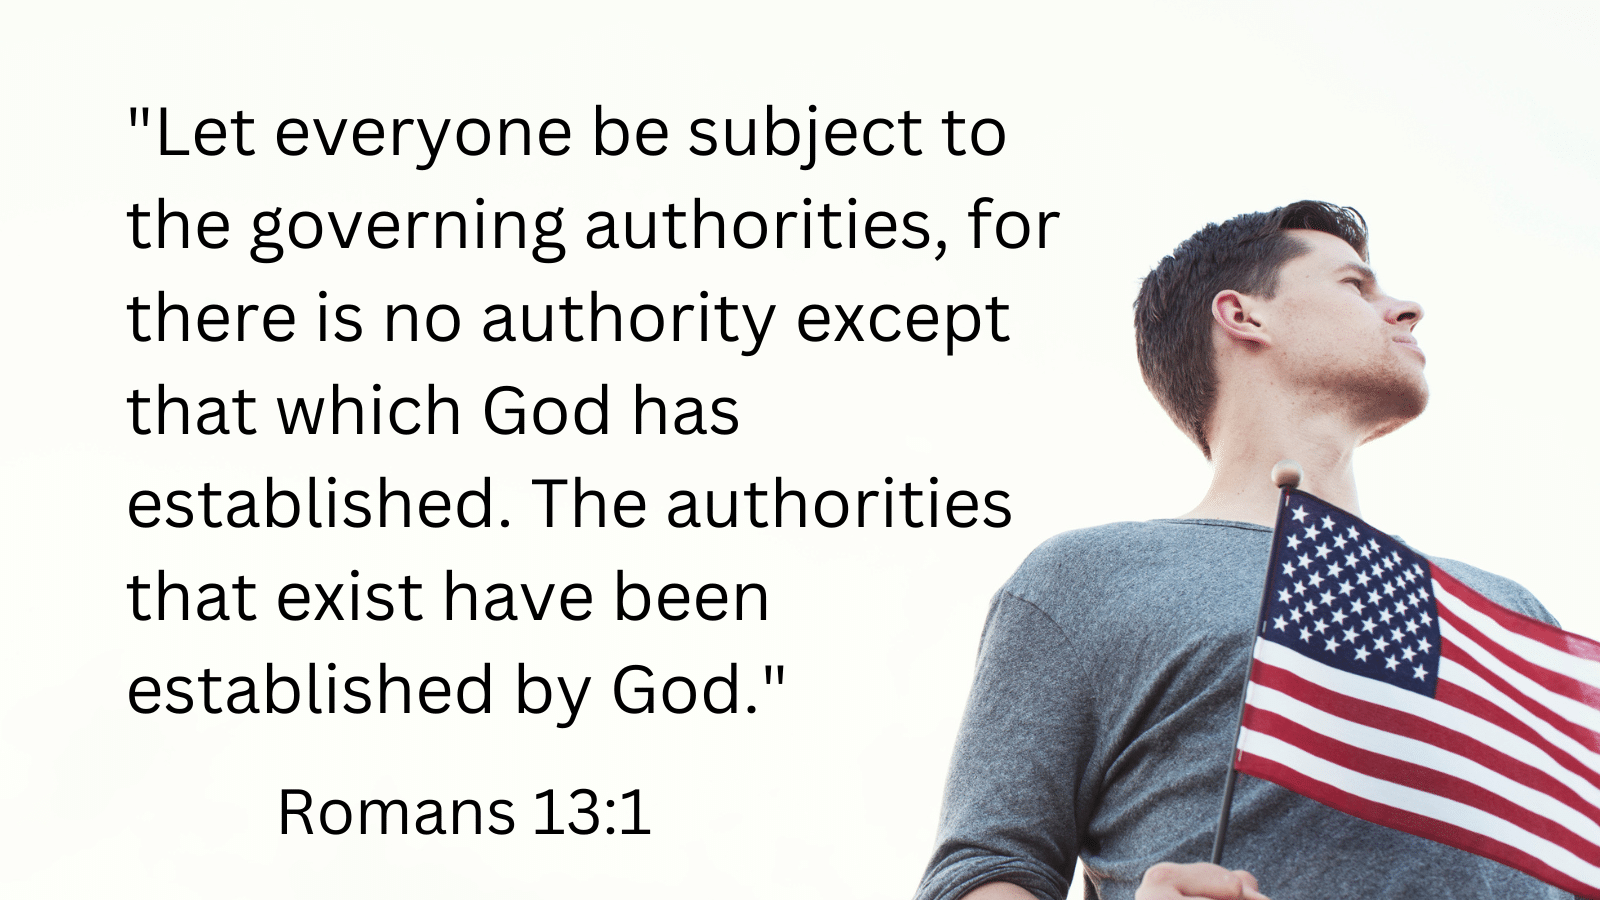 Man holding American flag with Romans 13:1